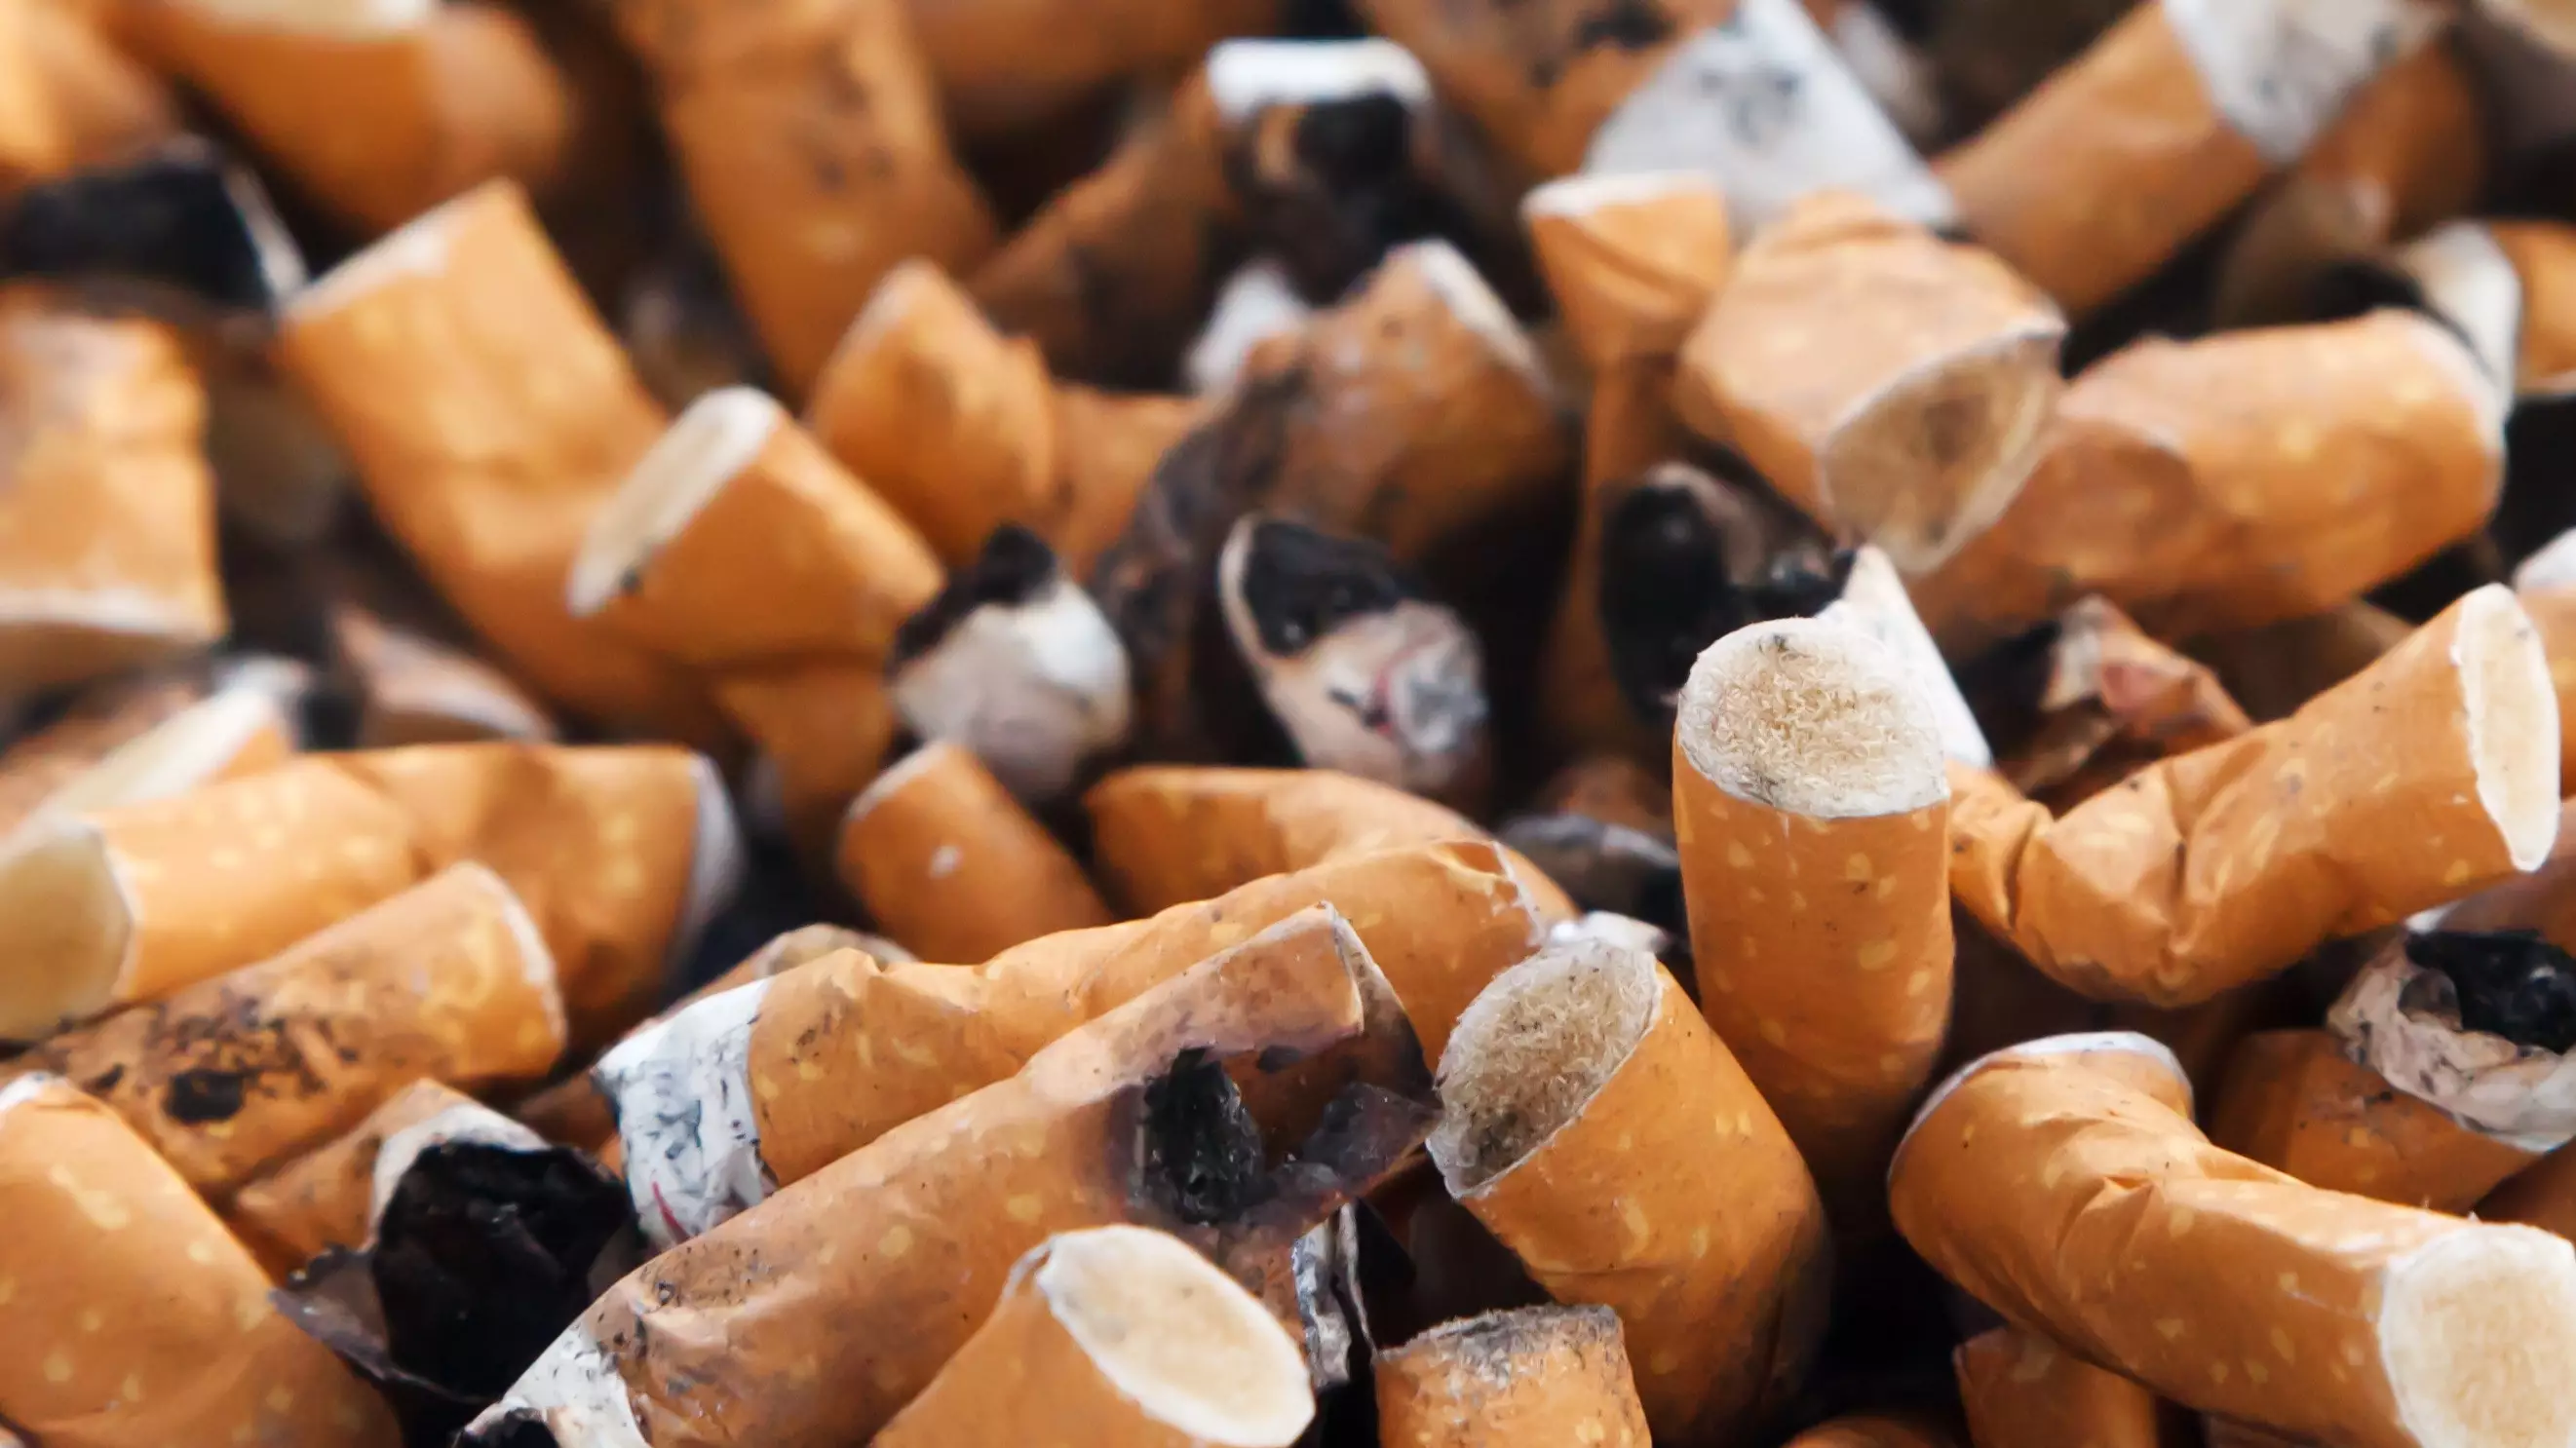 Leaked Government Plans Suggest Smoking Could Be Wiped Out In England In Just 11 Years